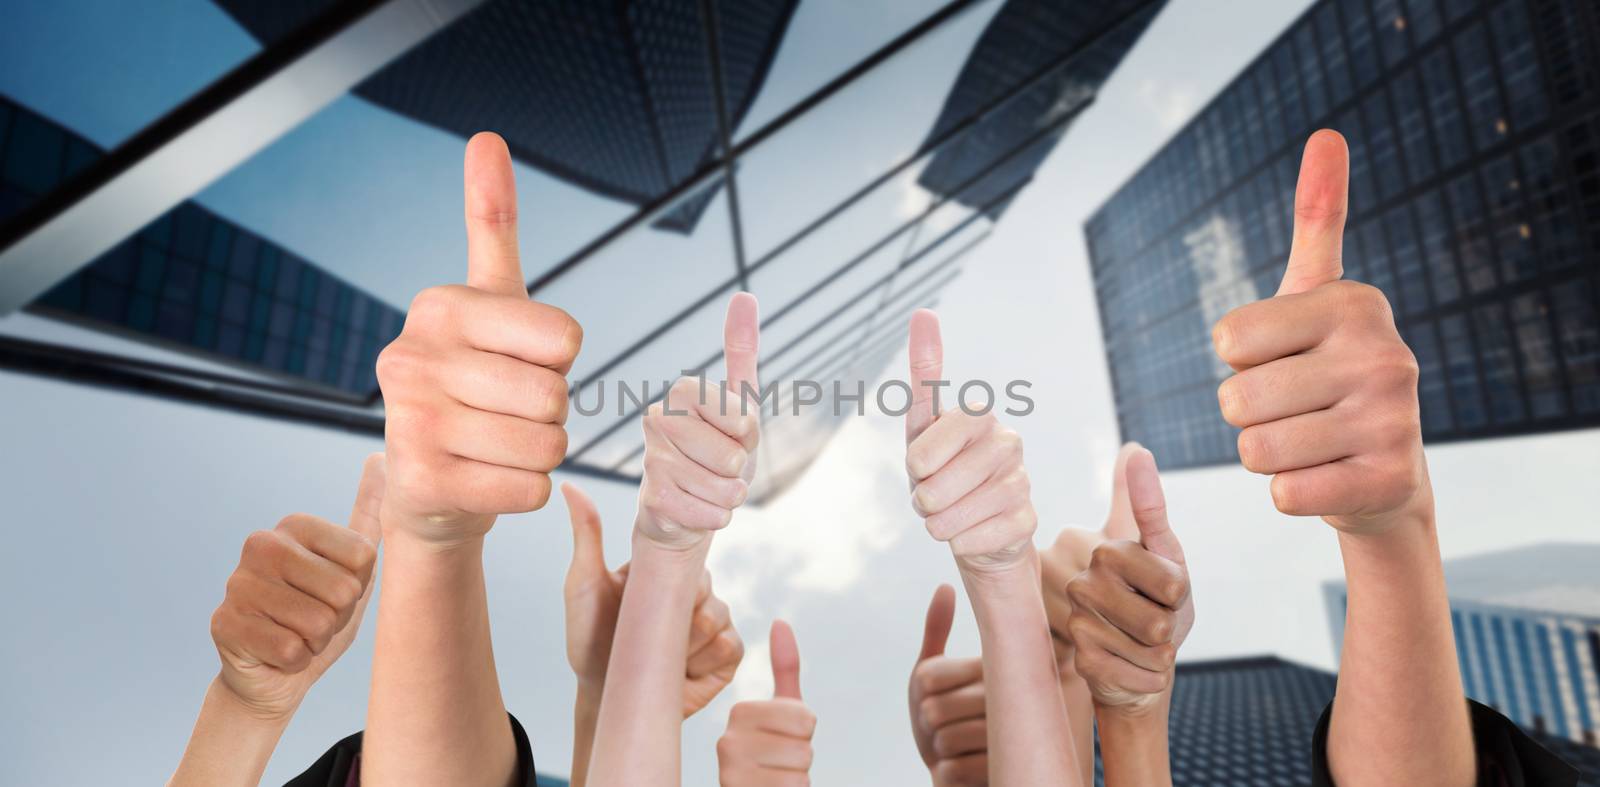 Hands showing thumbs up against skyscraper